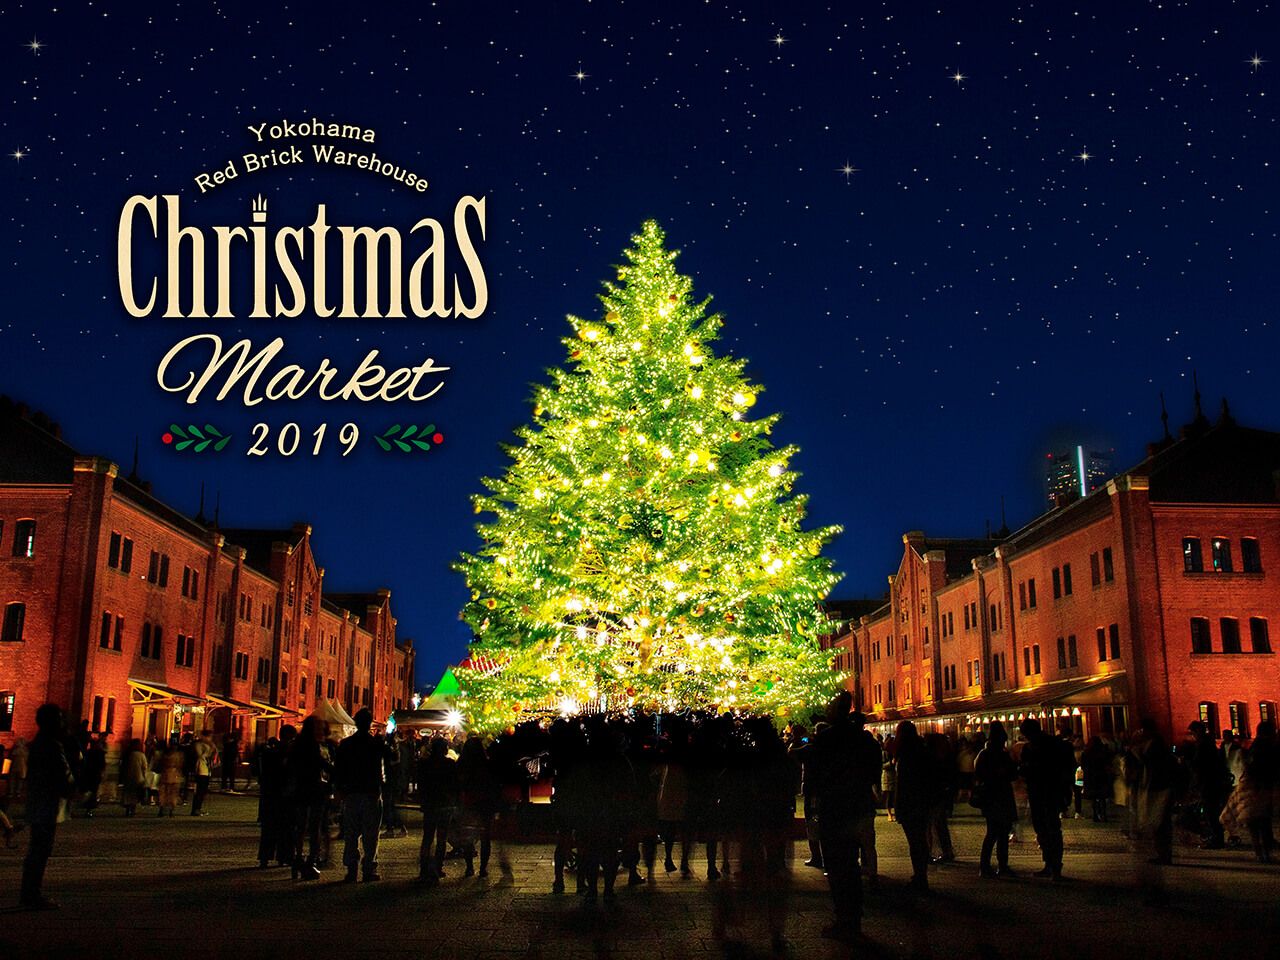 Christmas Market クリスマスマーケット2019 in 横浜赤レンガ倉庫